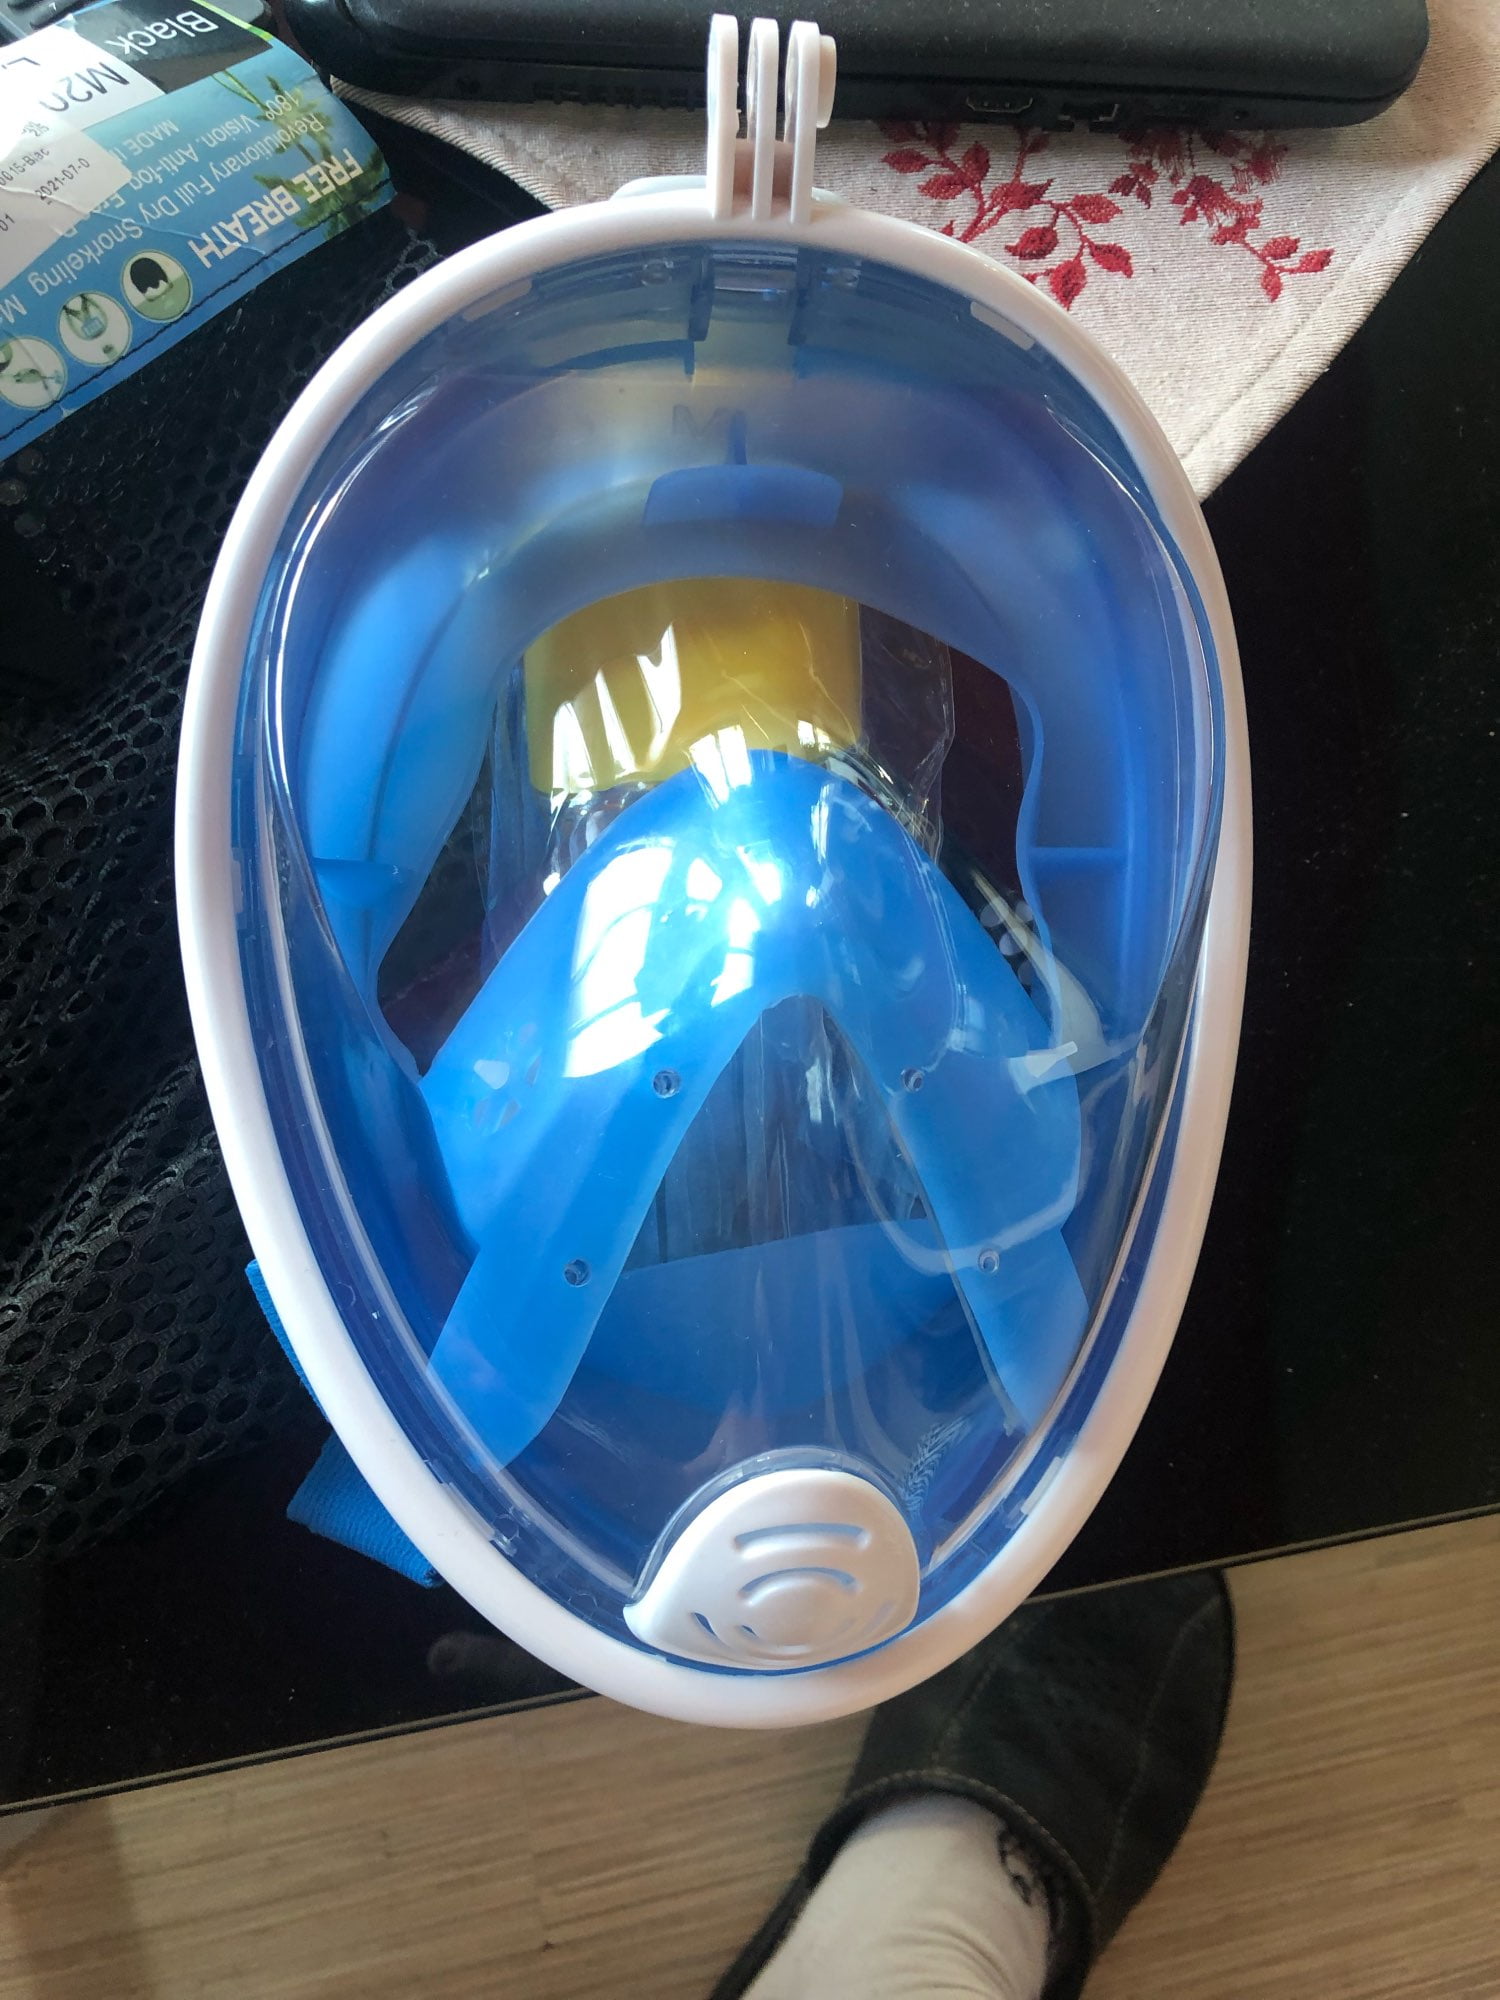 Full Face Snorkel Mask Best Scuba Mask, Double Tube Silicone Full Dry Diving Headgear photo review